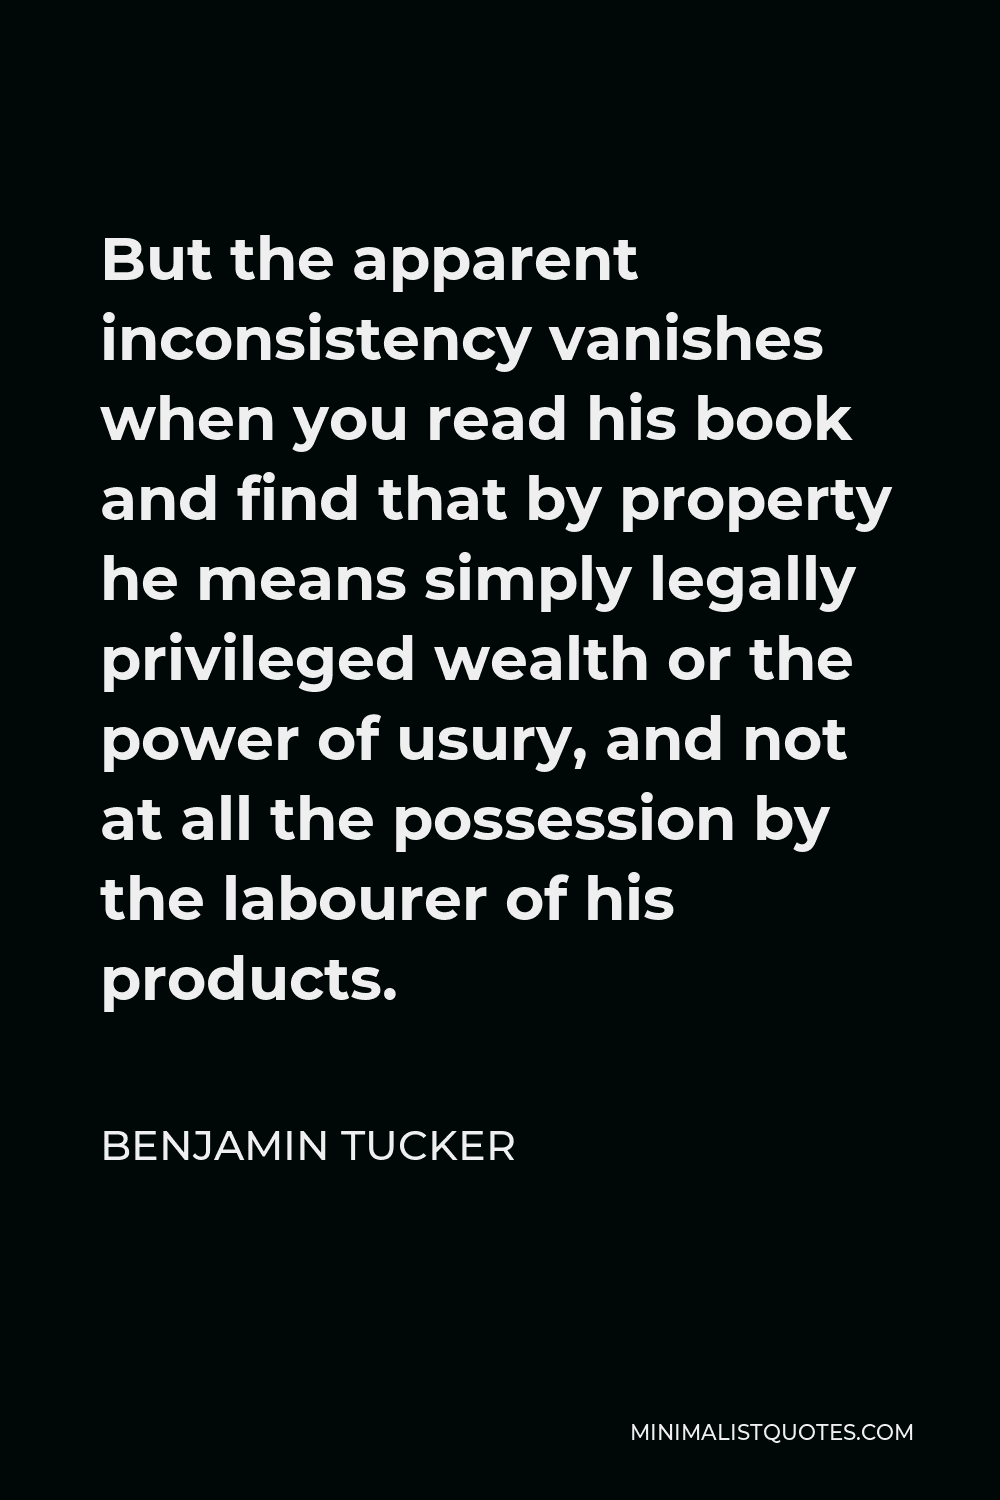 Benjamin Tucker Quote - But the apparent inconsistency vanishes when you read his book and find that by property he means simply legally privileged wealth or the power of usury, and not at all the possession by the labourer of his products.